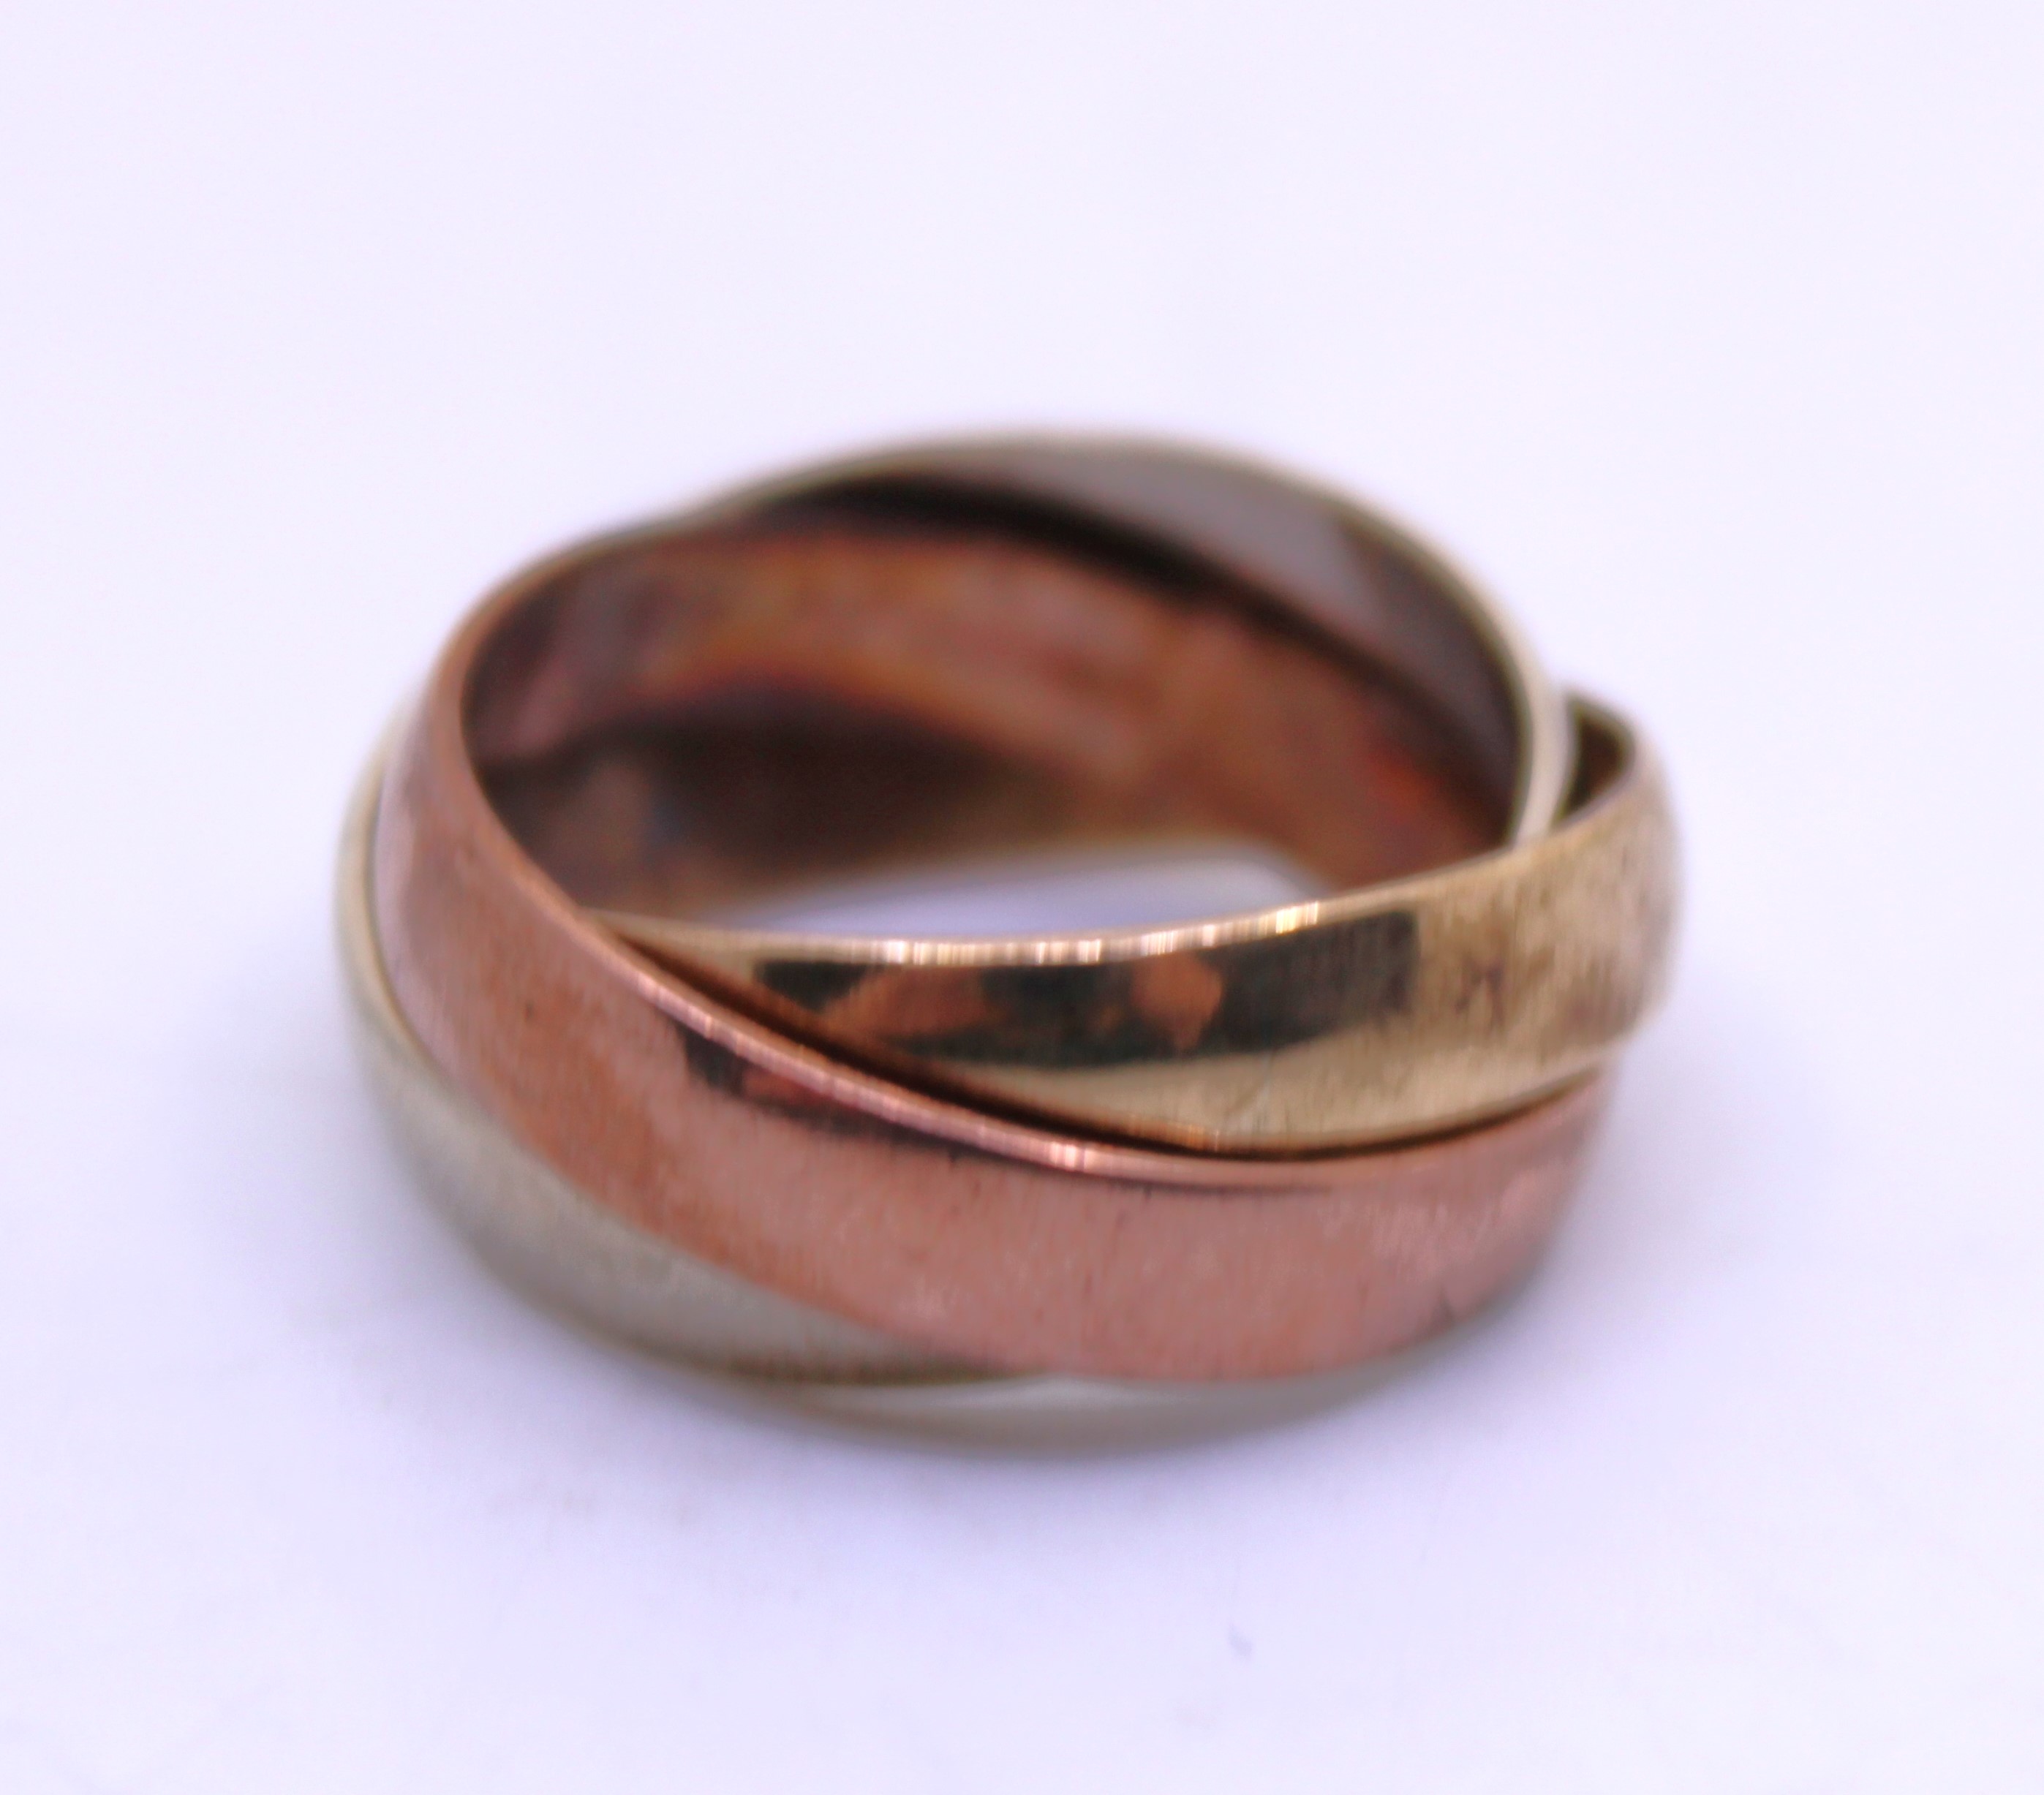 Tri-Coloured 9ct Gold Puzzle Ring.  Consists of a 9ct Rose Gold Band, 9ct Yellow Gold Band and 9ct